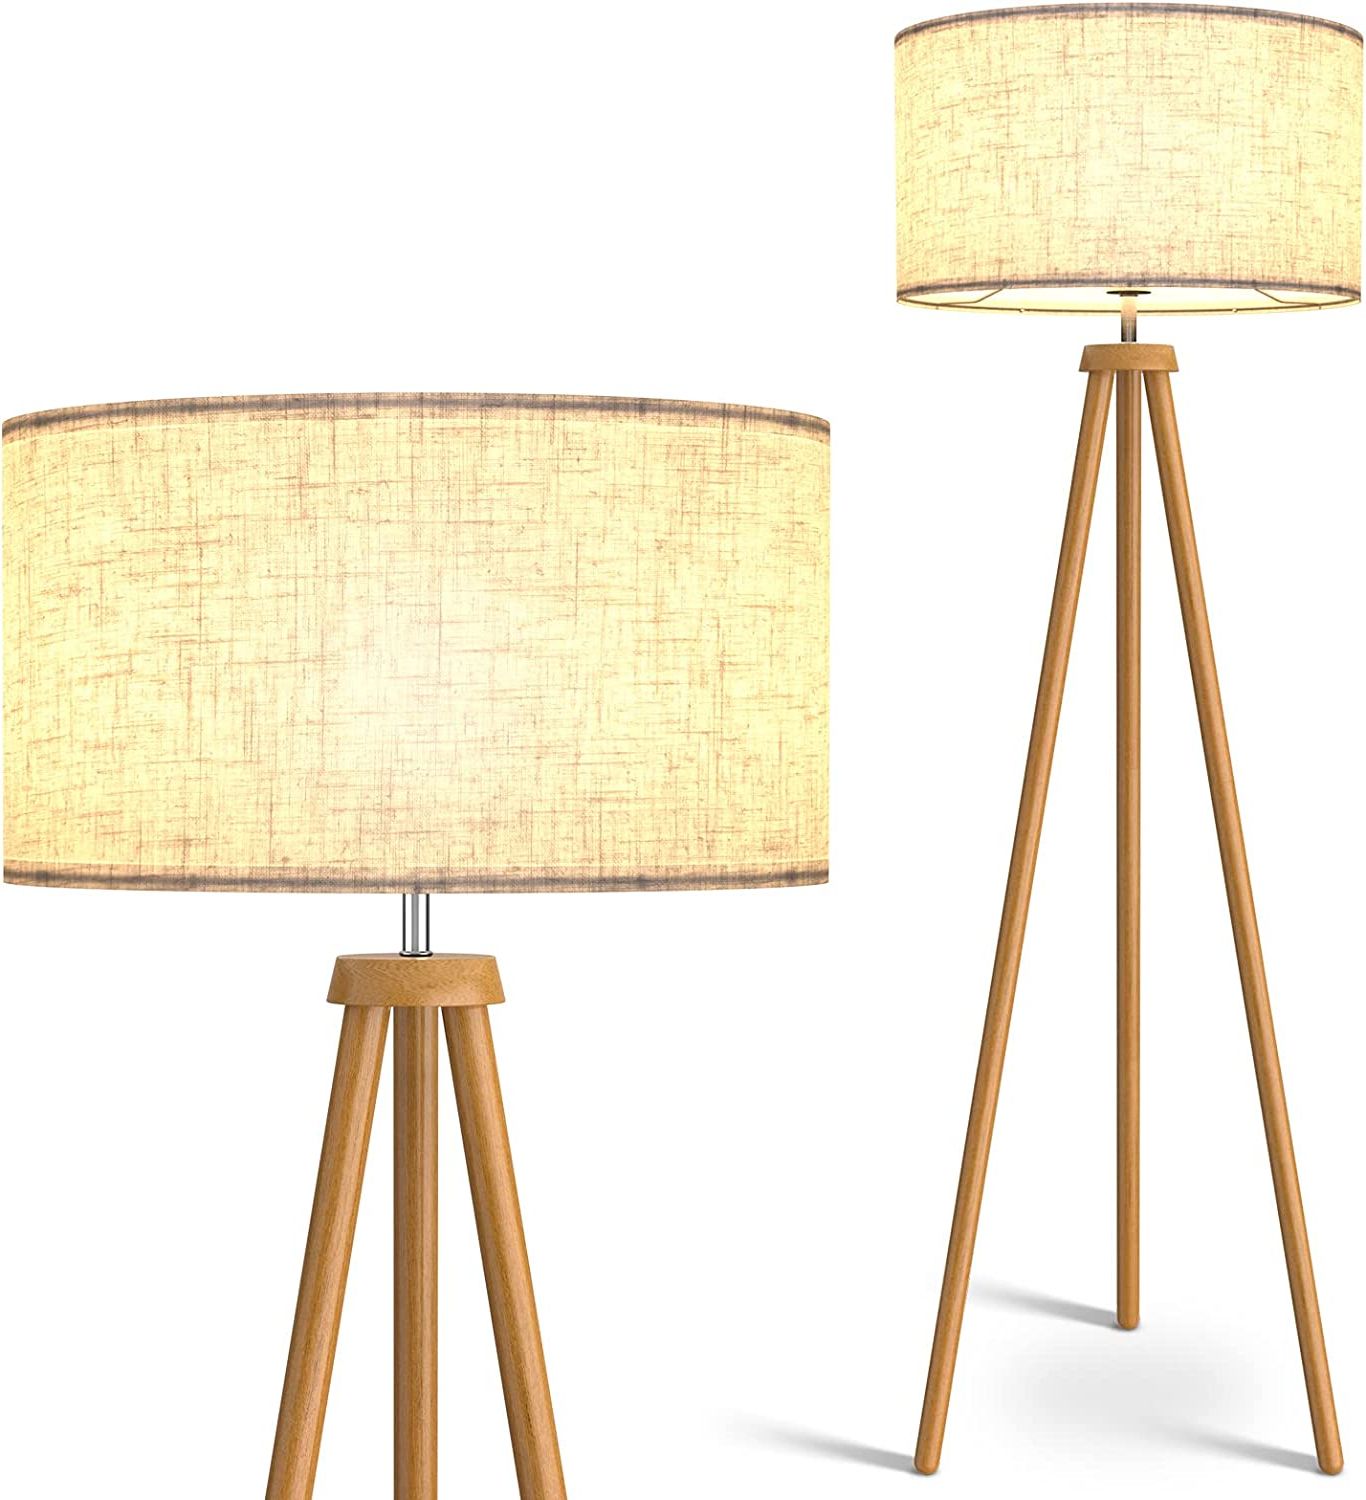 Lepower Wood Tripod Floor Lamp, Mid Century Standing Lamp, Flaxen Lamp  Shade With E26 Lamp Base, Floor Reading Lamp For Living Room Bedroom, Study  Room And Office : Amazon (View 15 of 15)